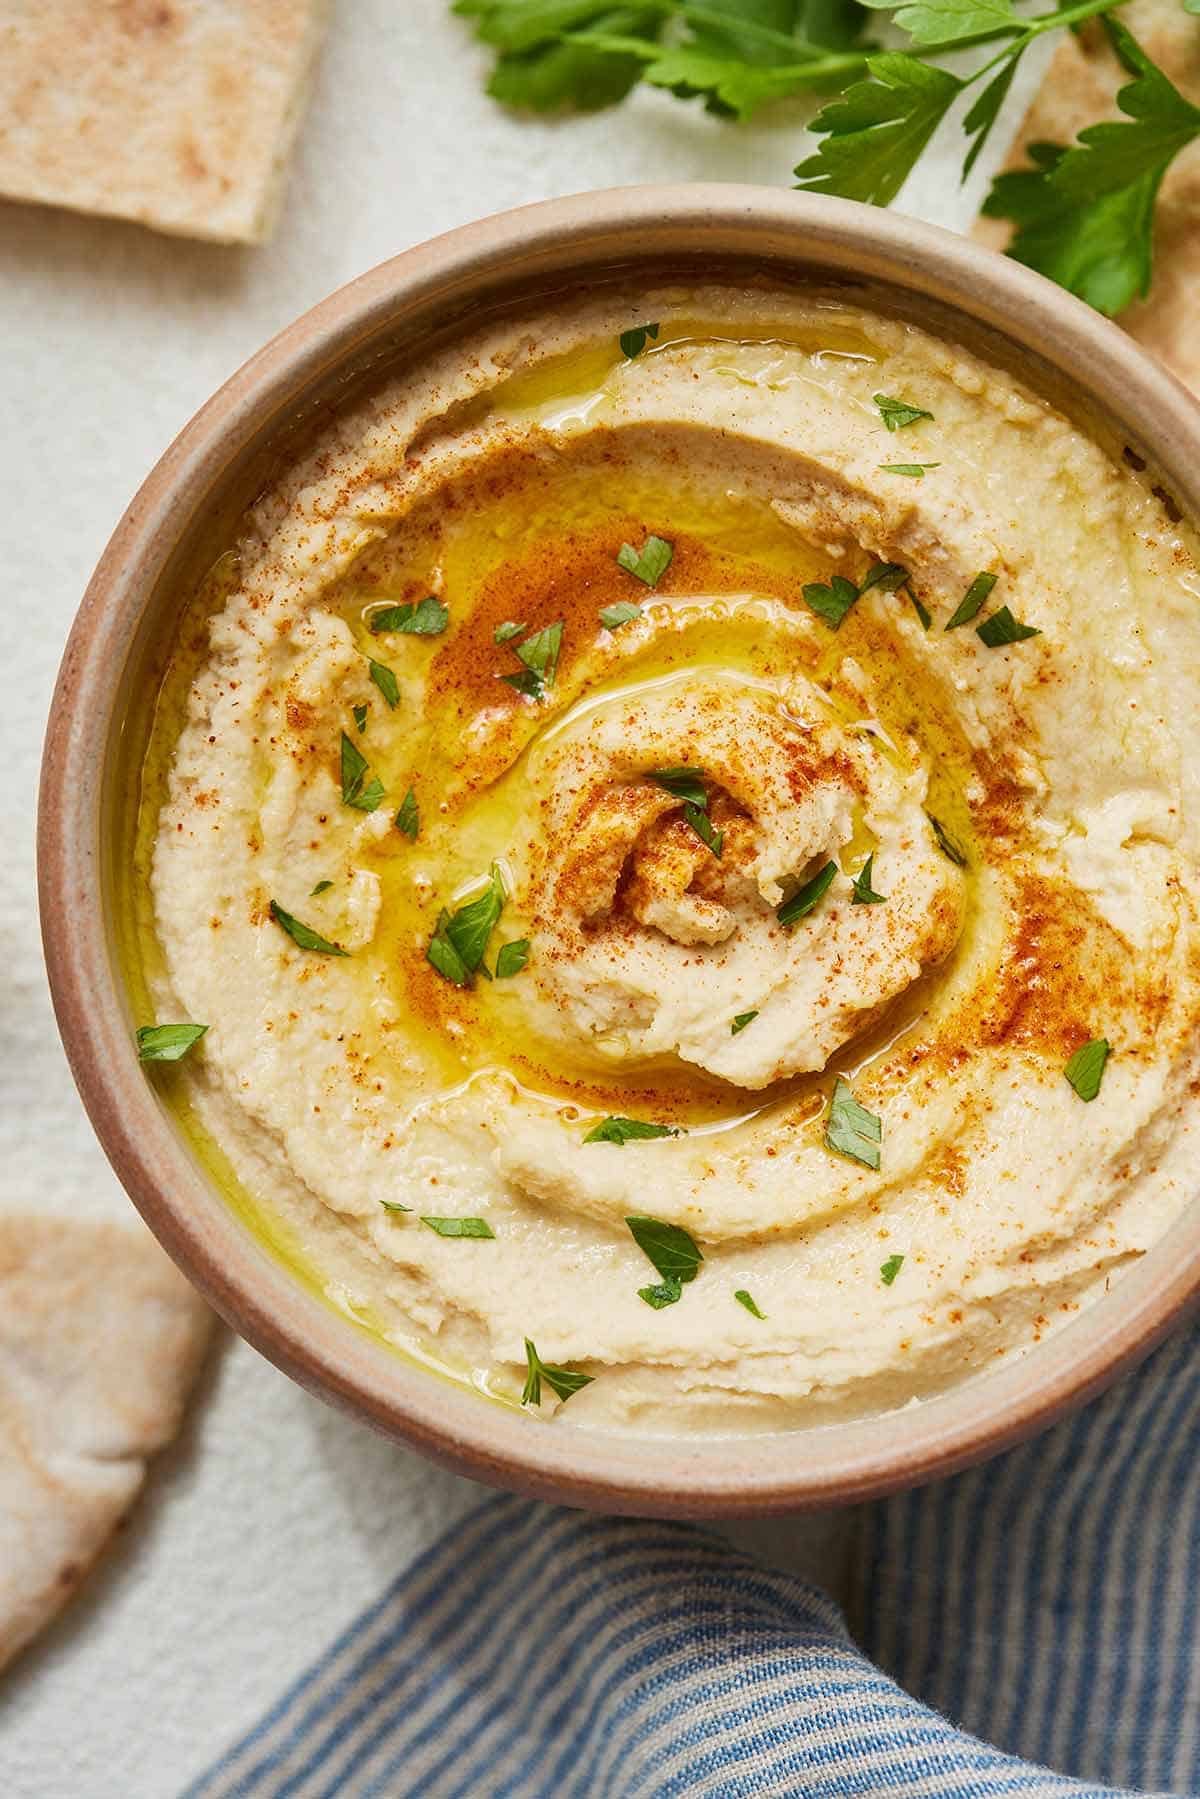 Overhead view of a bowl of hummus with pita bread around it.